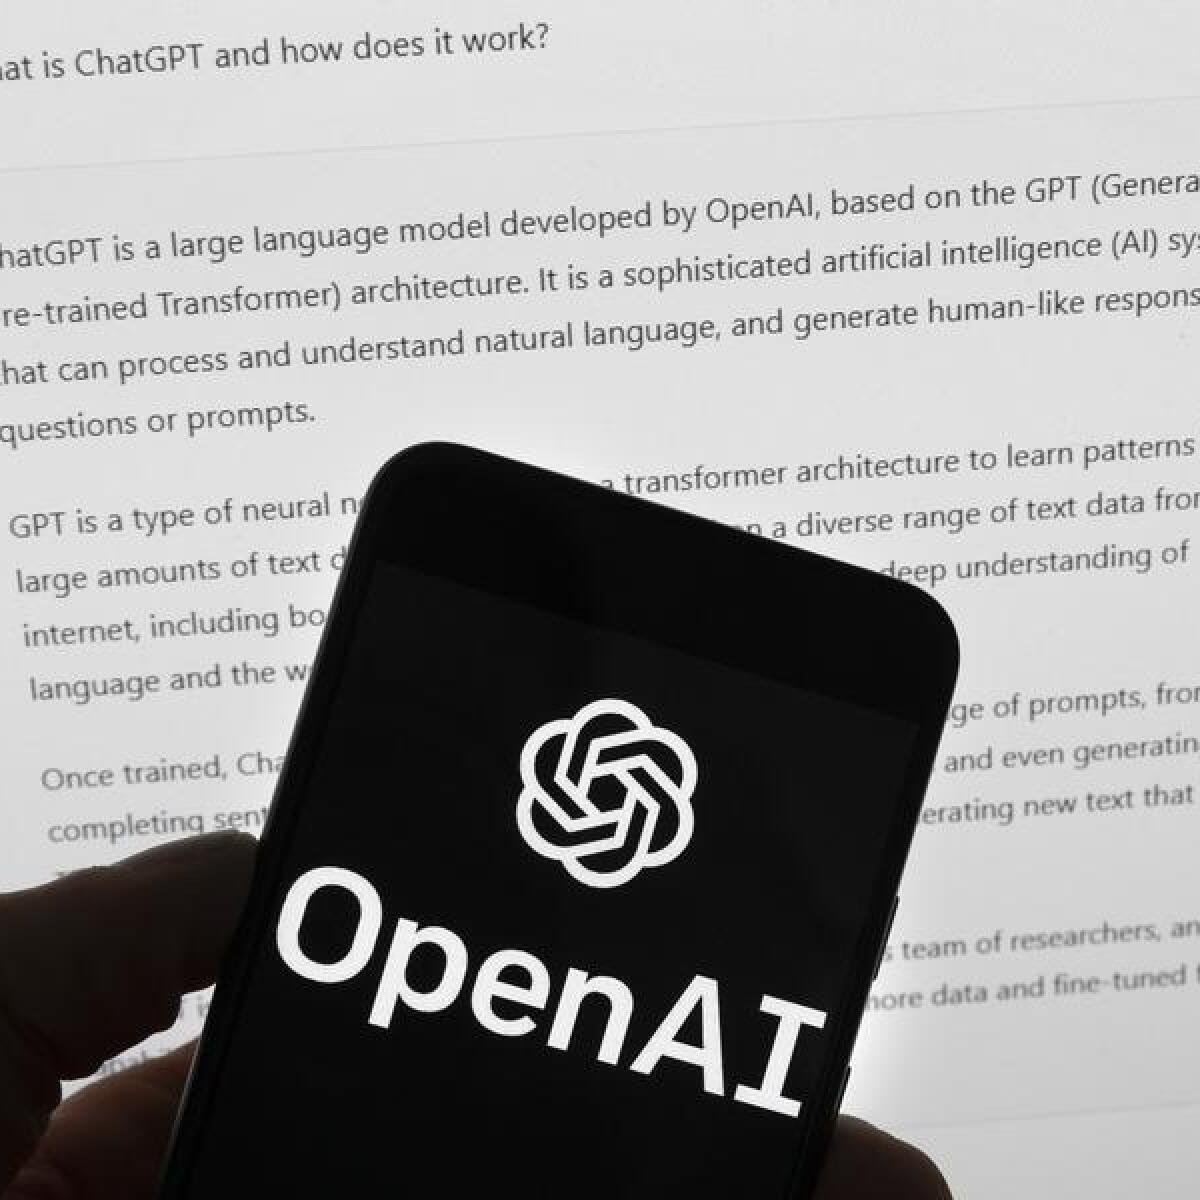 The Open AI logo on a mobile phone